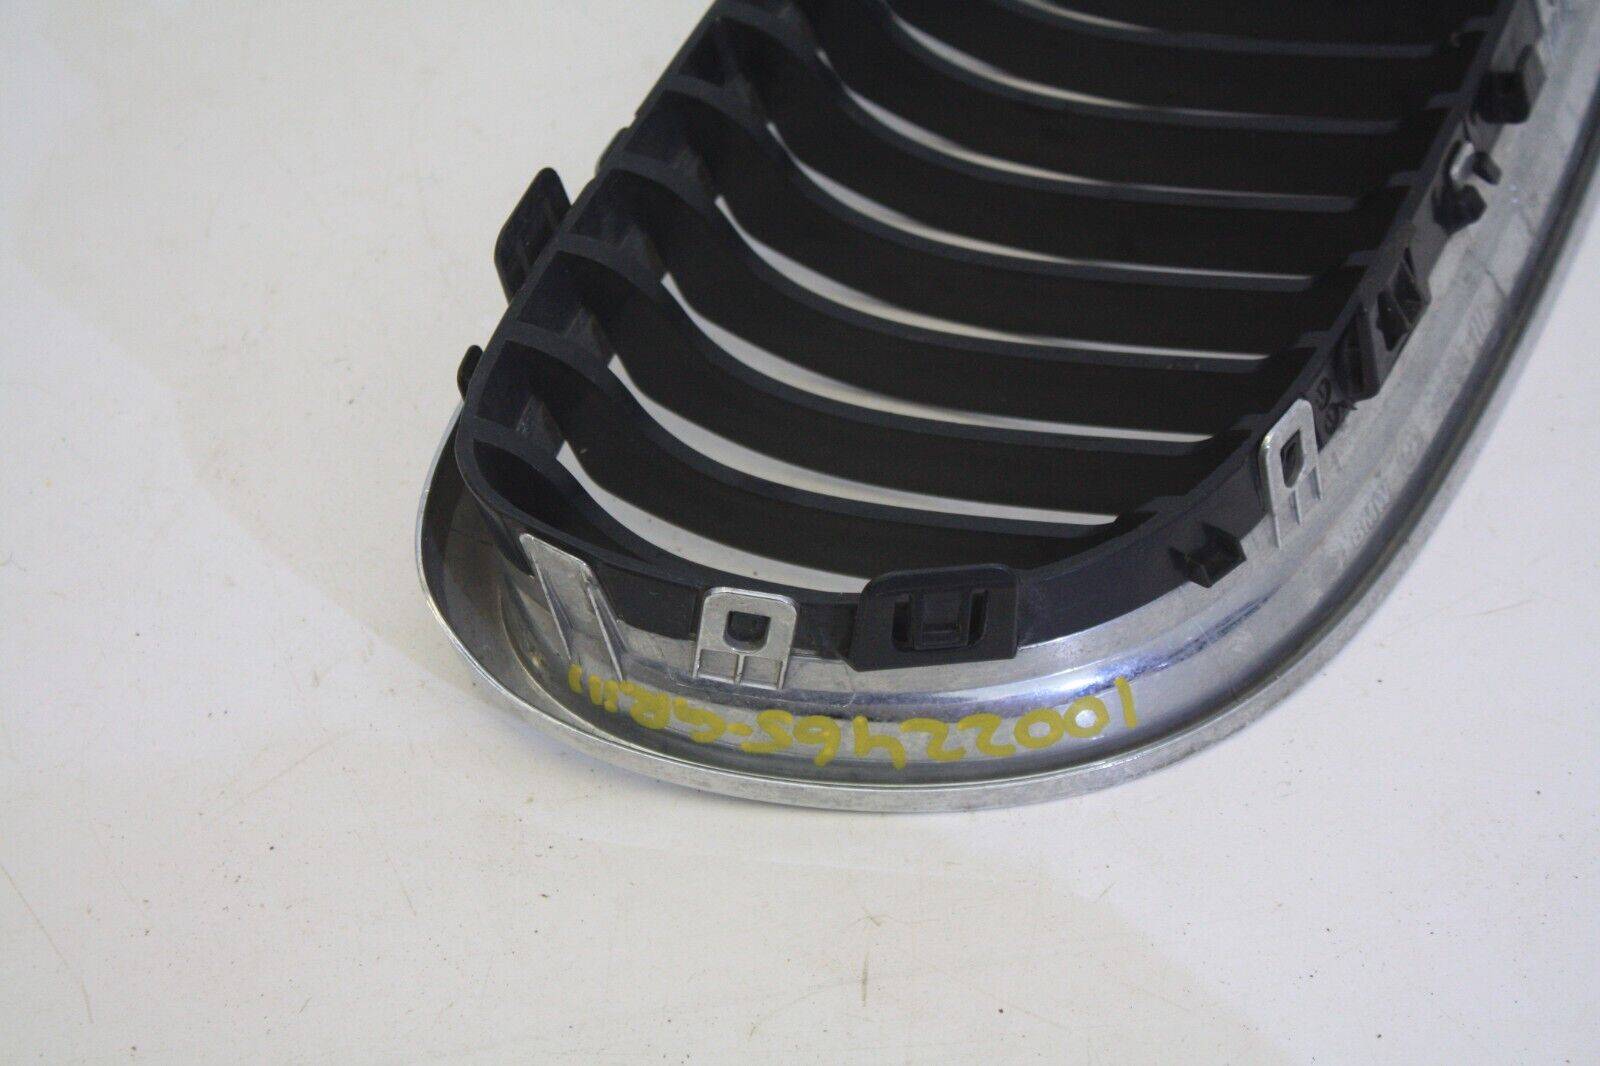 BMW-3-Series-E90-LCI-Front-Bumper-Left-Kidney-Grill-2008-TO-2012-51137201967-176234542894-7